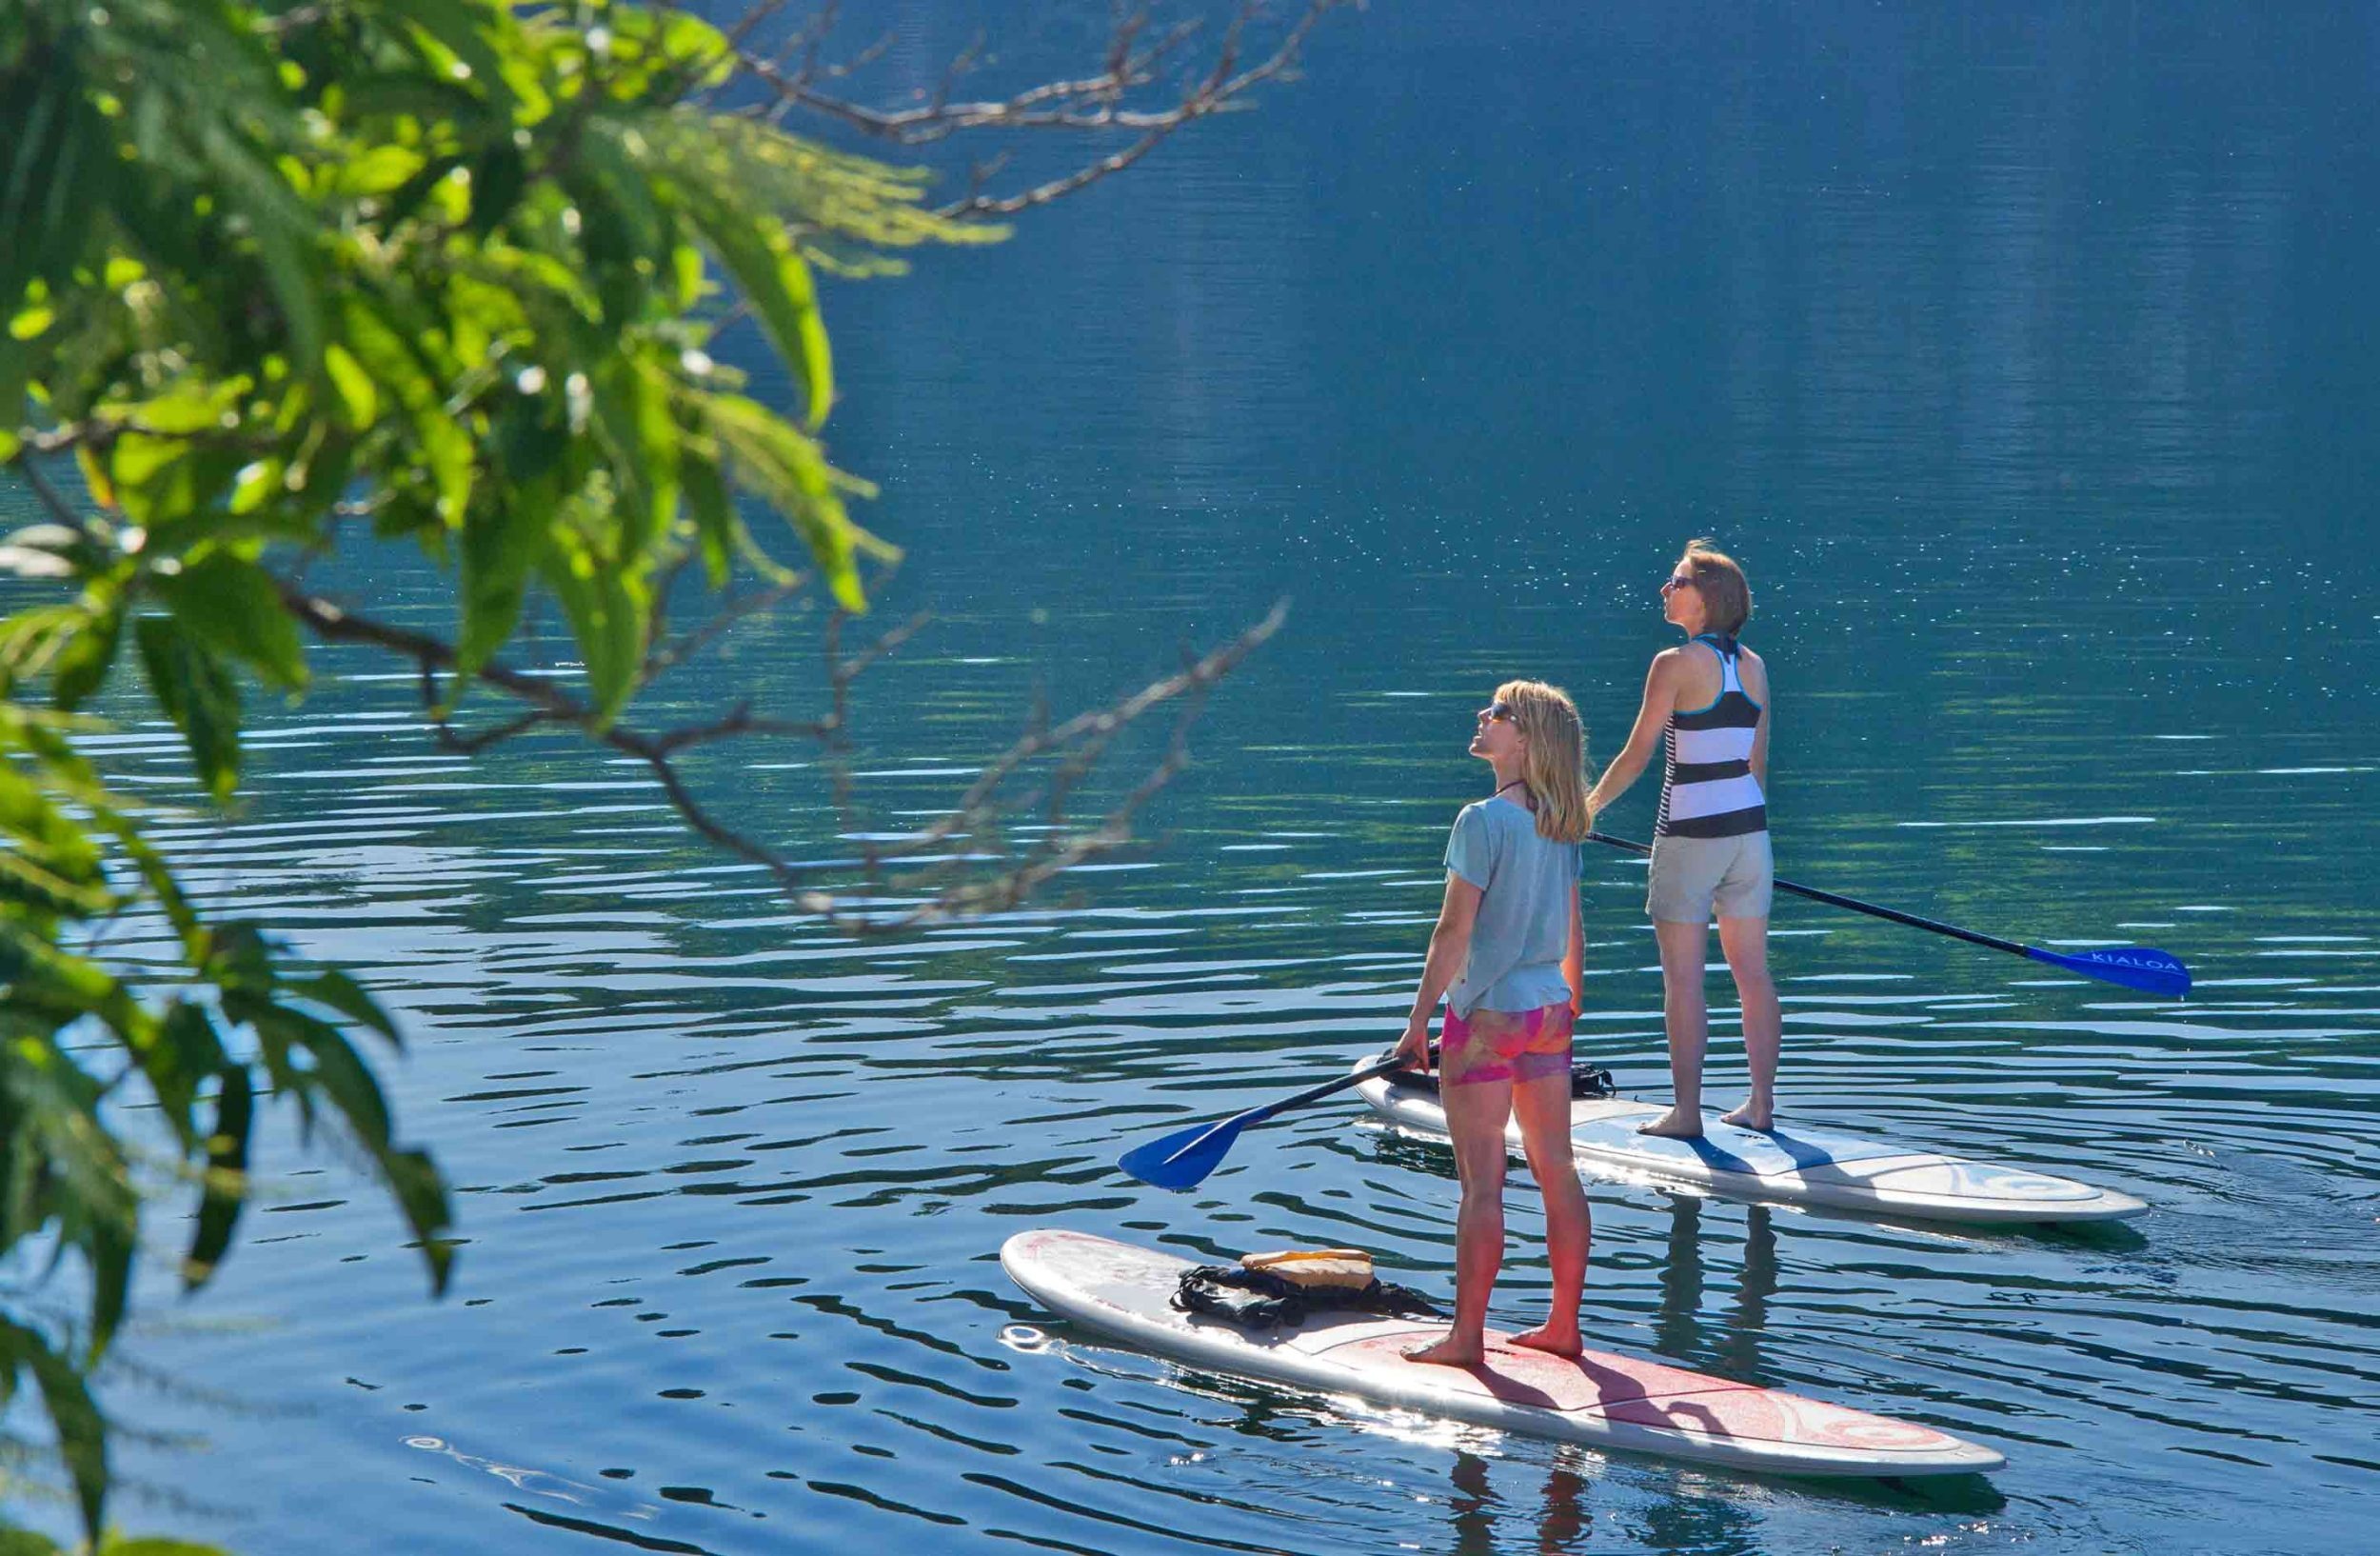 Stand up paddleboarding in New River Gorge, Ace Adventure Resort, West Virginia, Whitewater paddleboarding, 2500x1640 HD Desktop